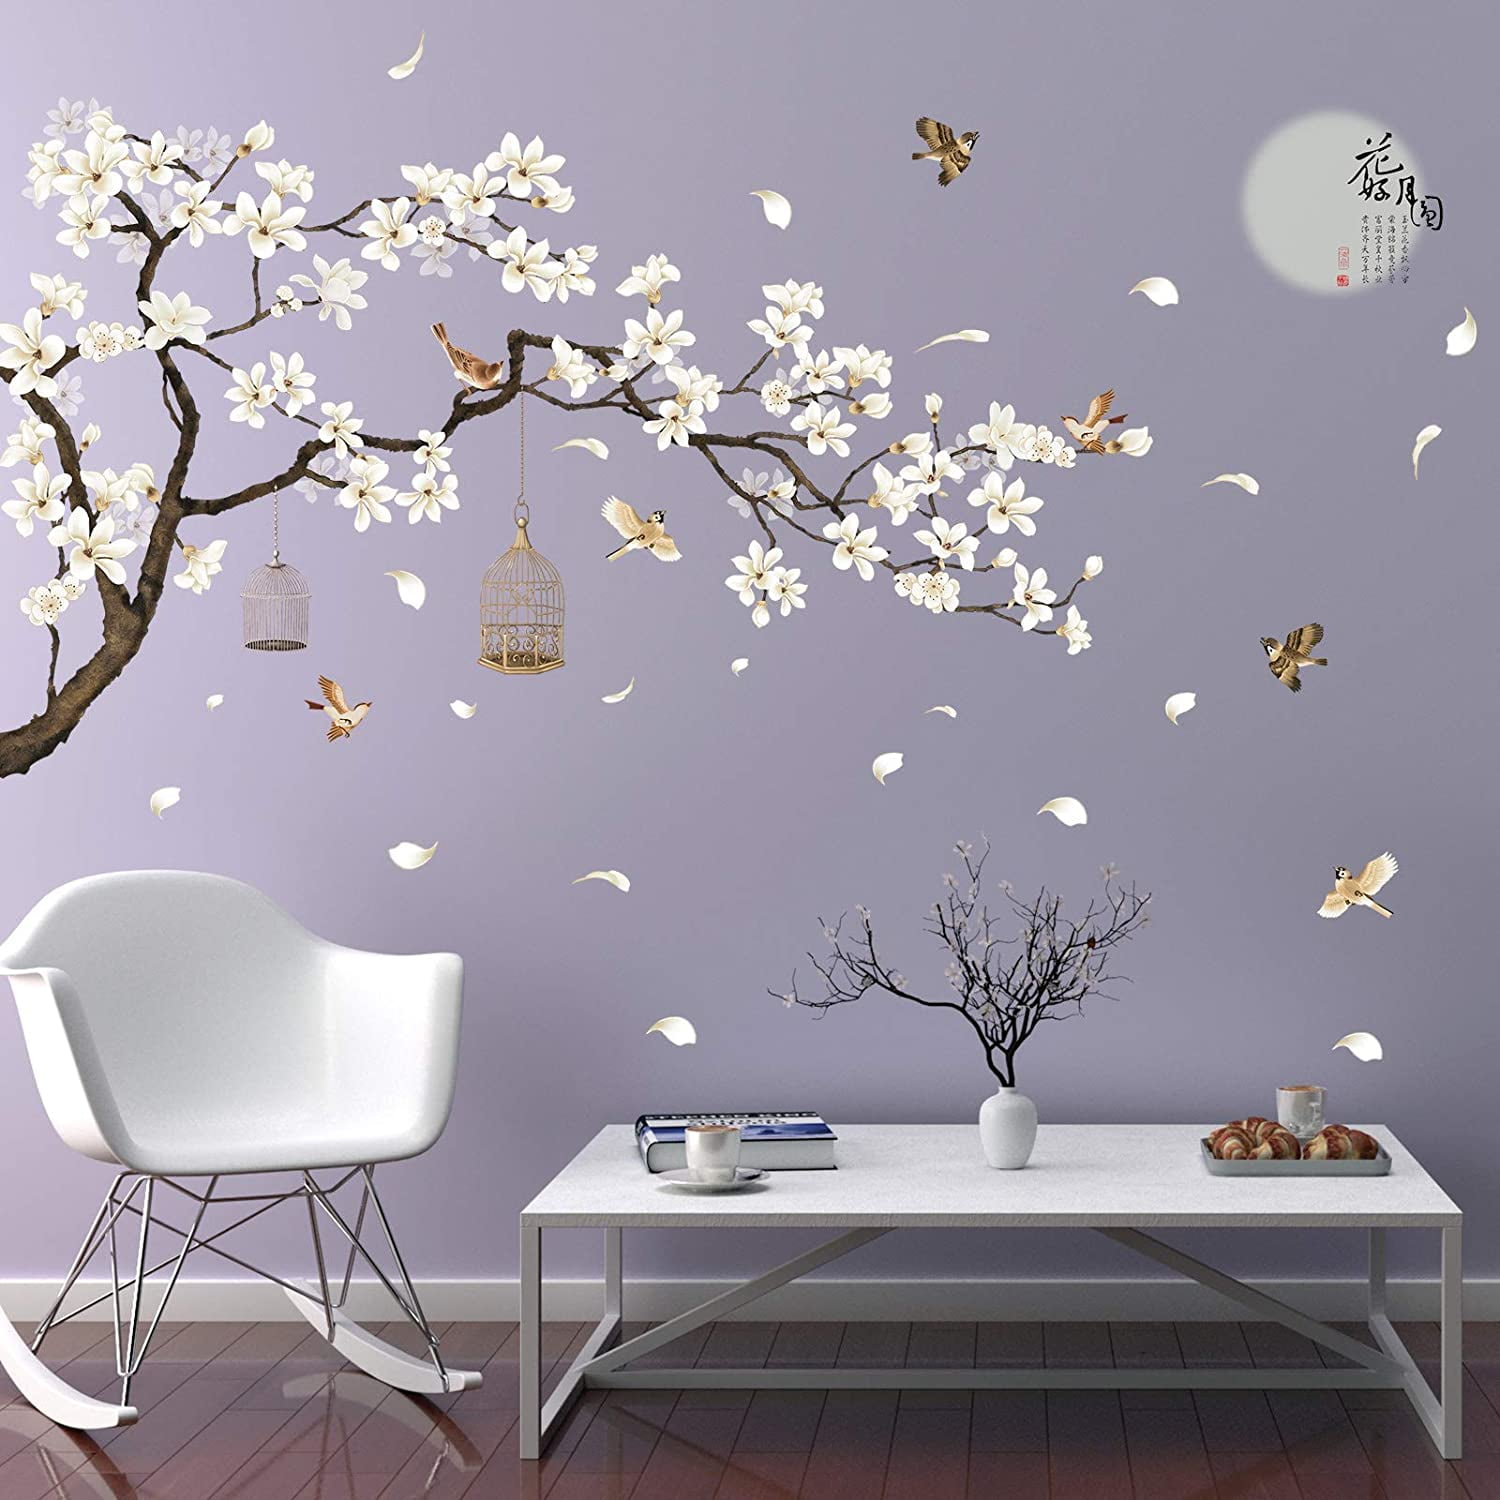 Flowers Branch Wall Sticker Removable Art Home Decor Decal Mural Kids Room 